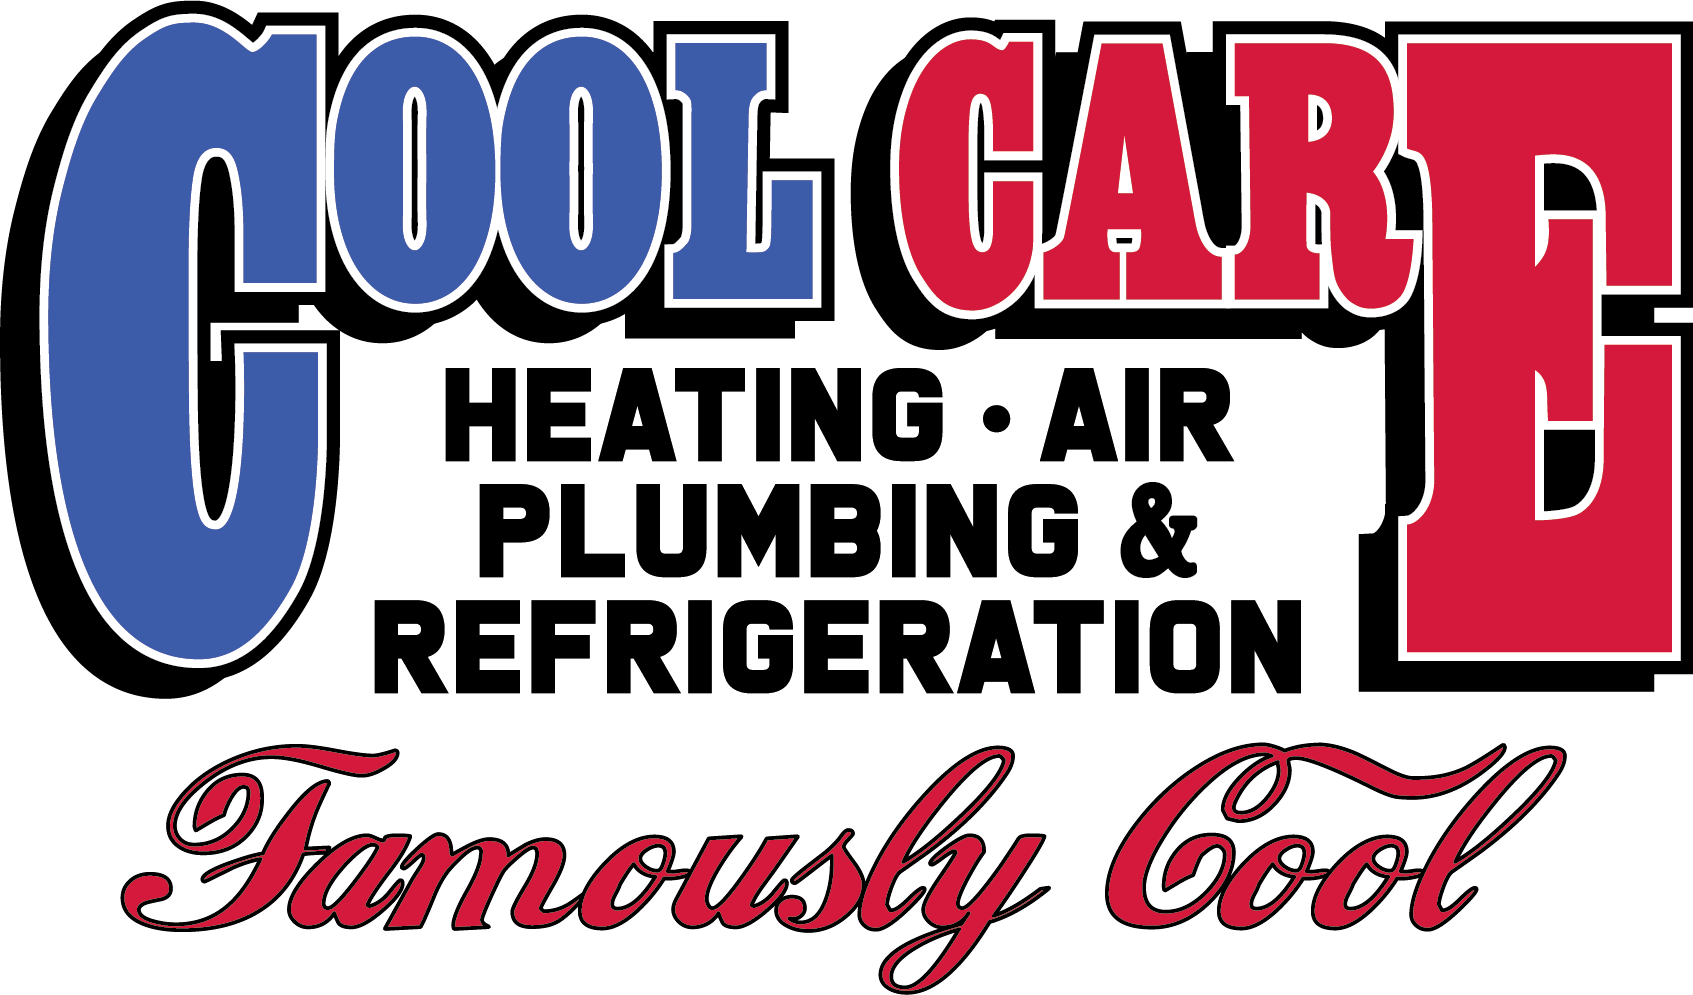 Cool Care Heating Air Plumbing  Refrigeration